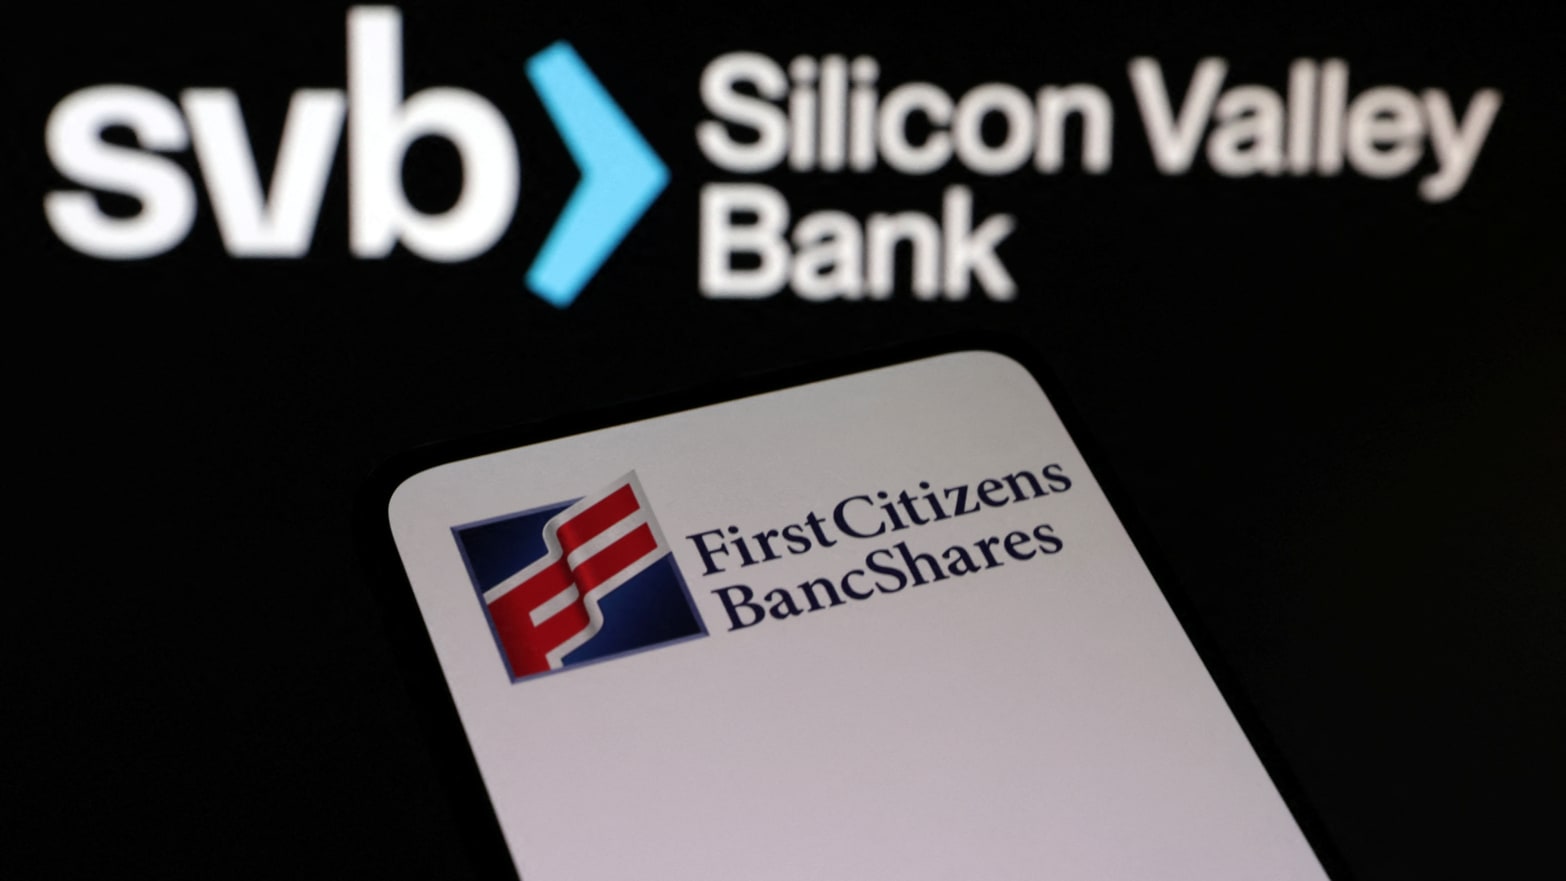 First Citizens BancShares and SVB (Silicon Valley Bank) logos